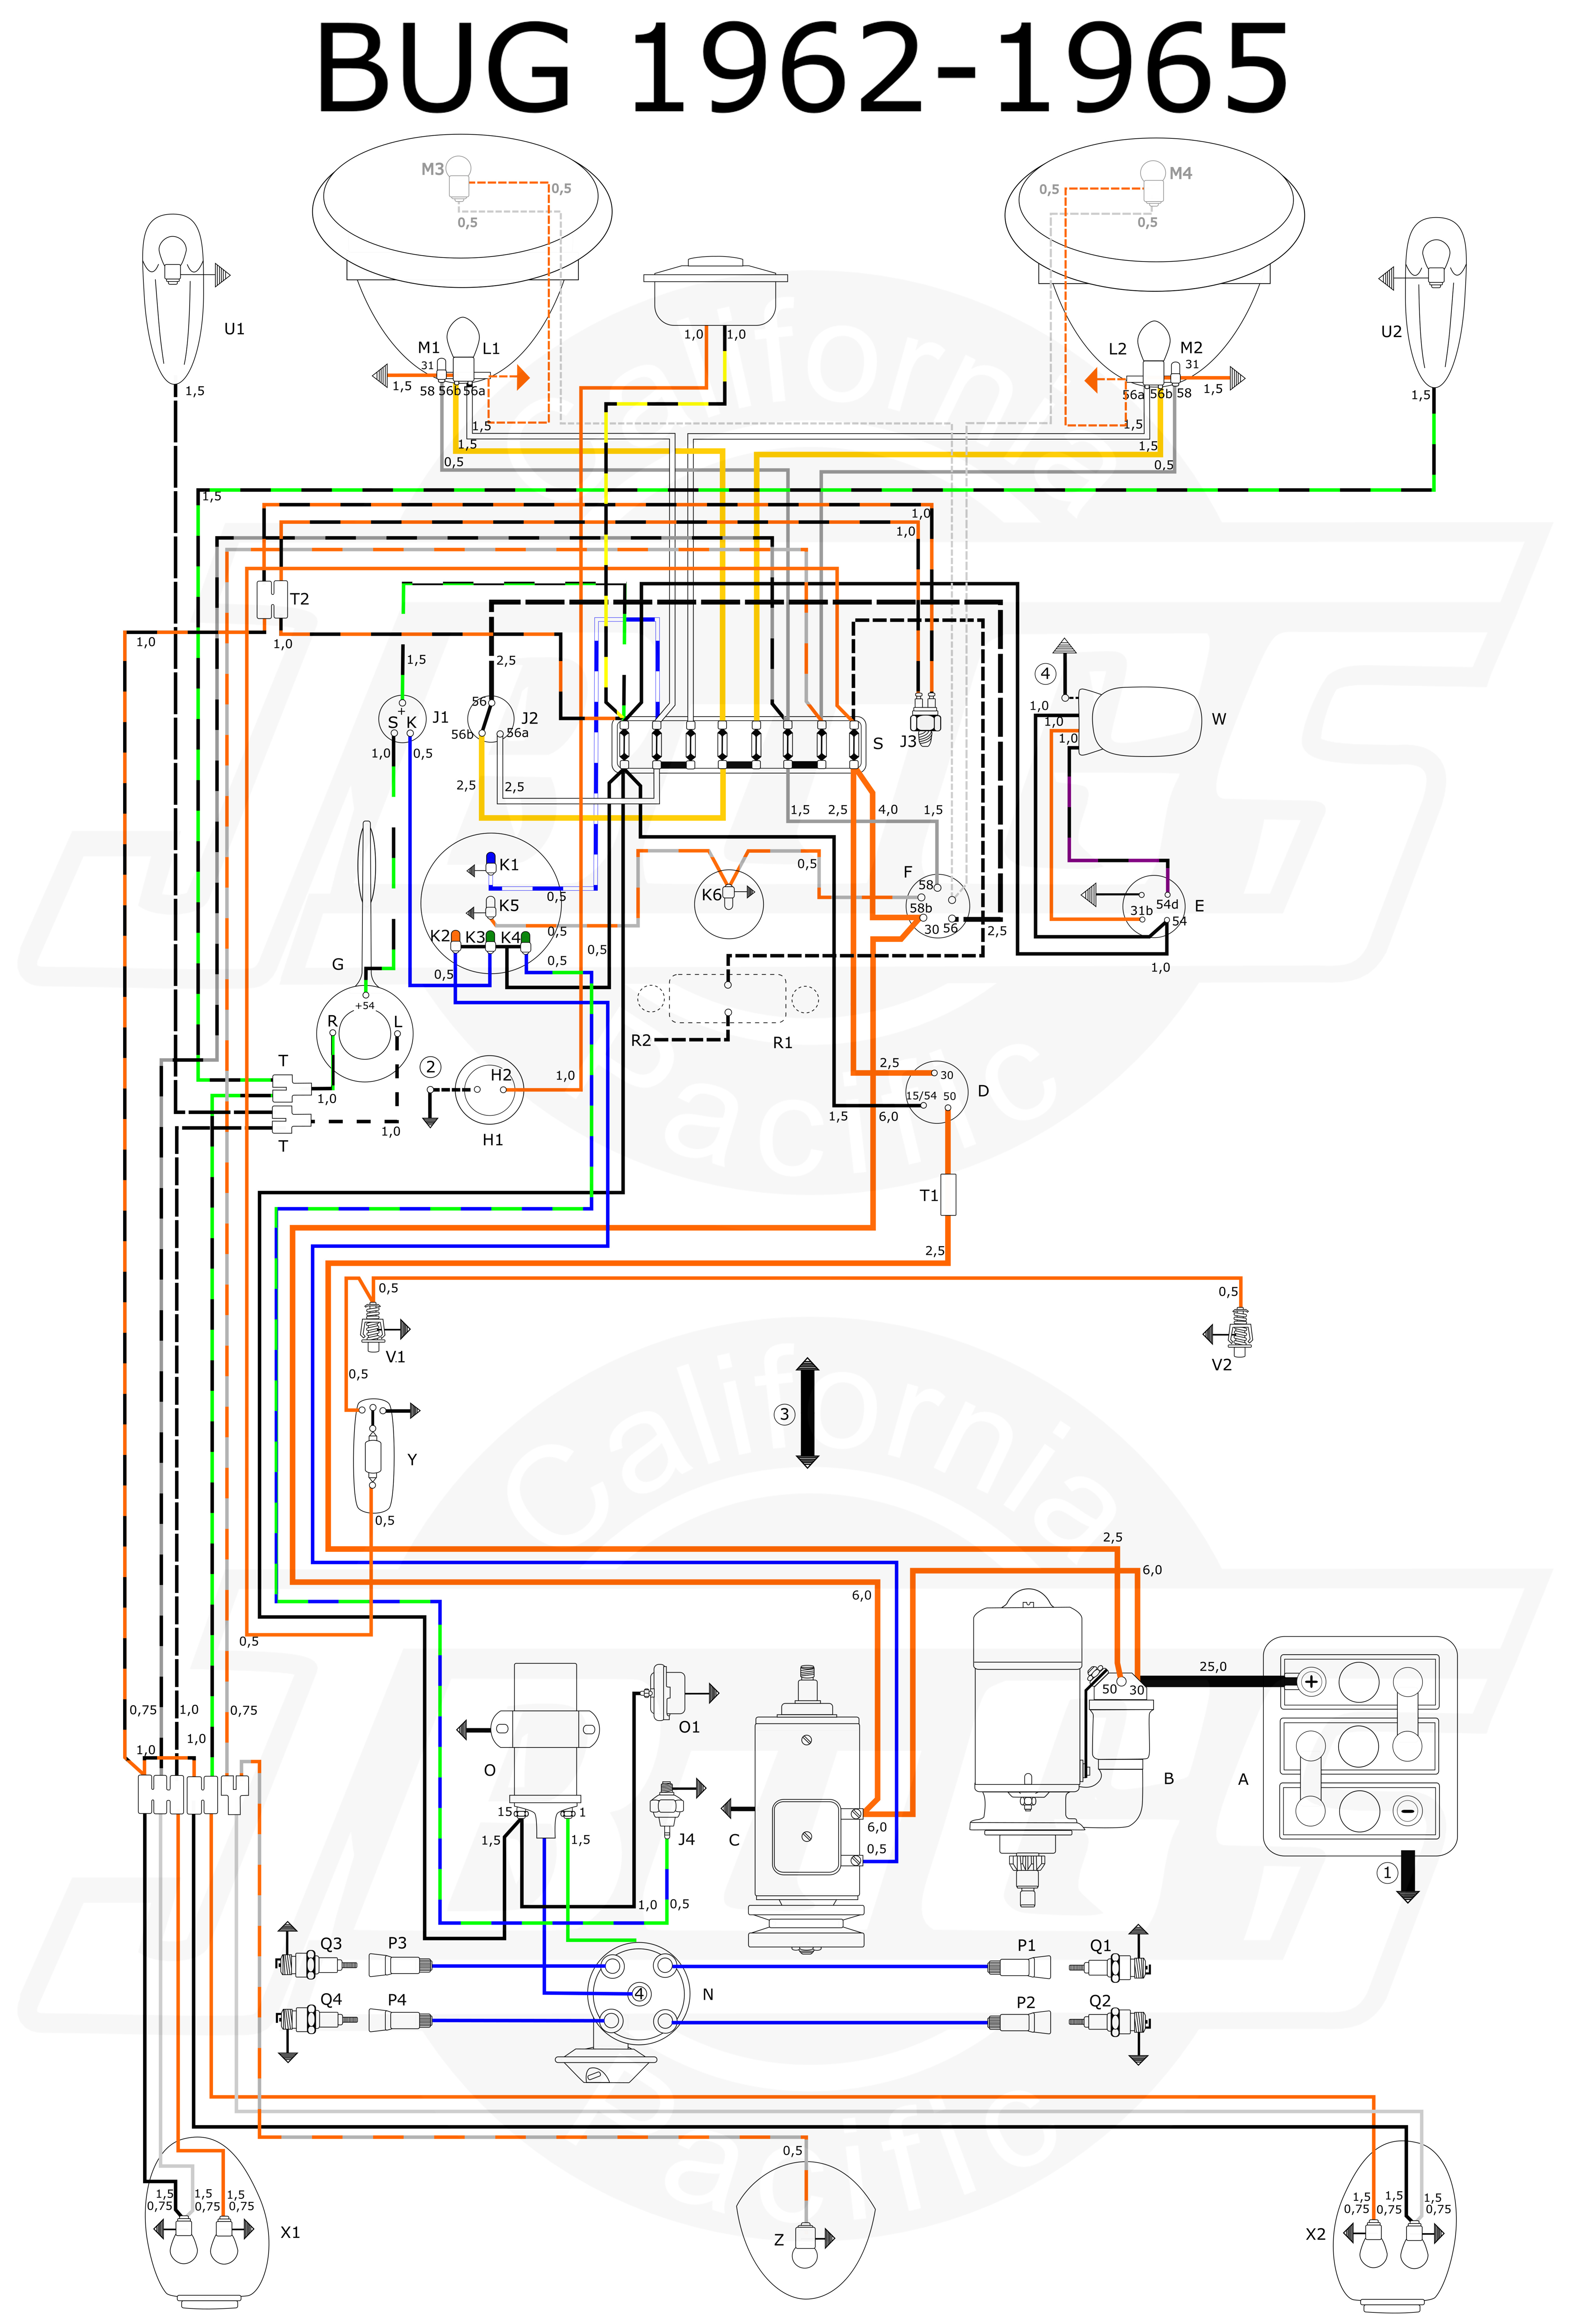 1971 Vw Beetle Ignition Switch Wiring Diagram from www.jbugs.com